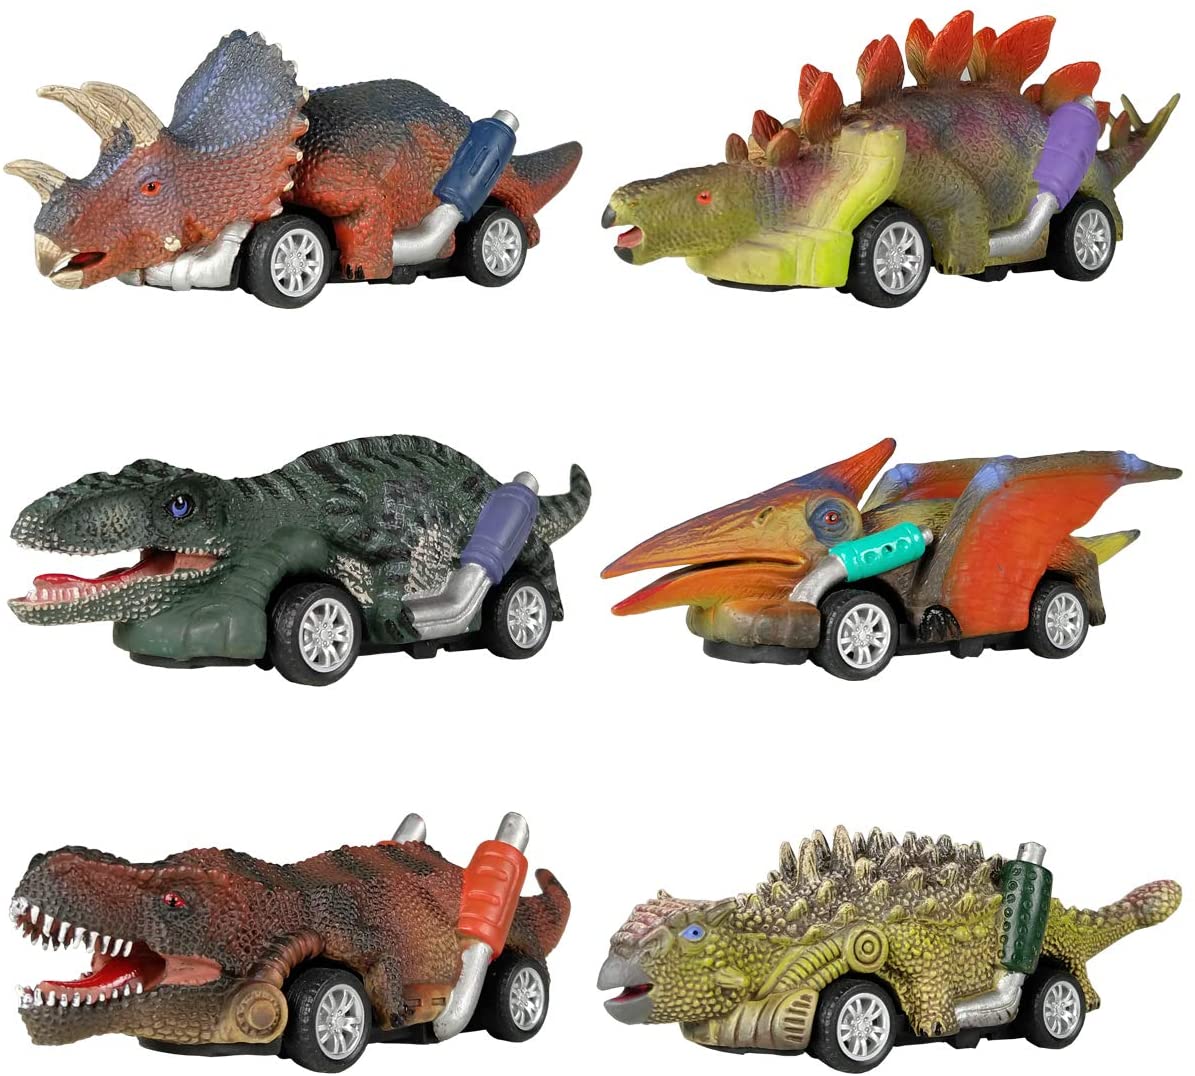 Dinosaur Truck Carrier Playset Toys Dinosaur Toys for Kids 3-5 5-7 Friction Powered Dinosaur Transport Car with 4 Dinosaurs and 4 Wildlife Animals Figures 